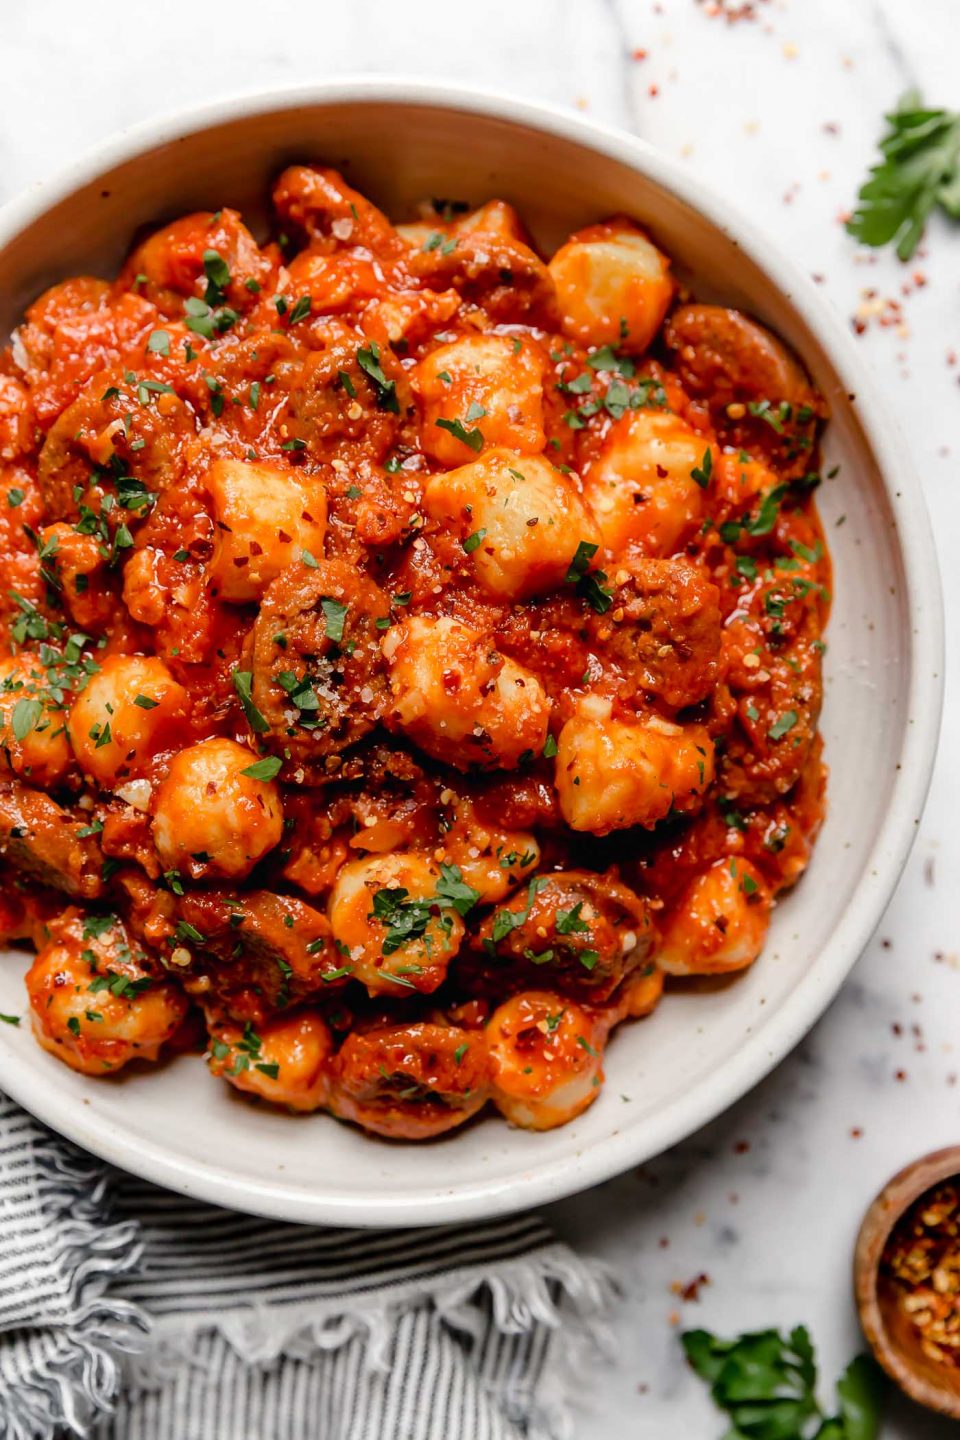 Gnocchi in Amatriciana sauce with Italian sausage. Served in a large white ceramic bowl, sitting on a white marble surface surrounded by fresh parsley.